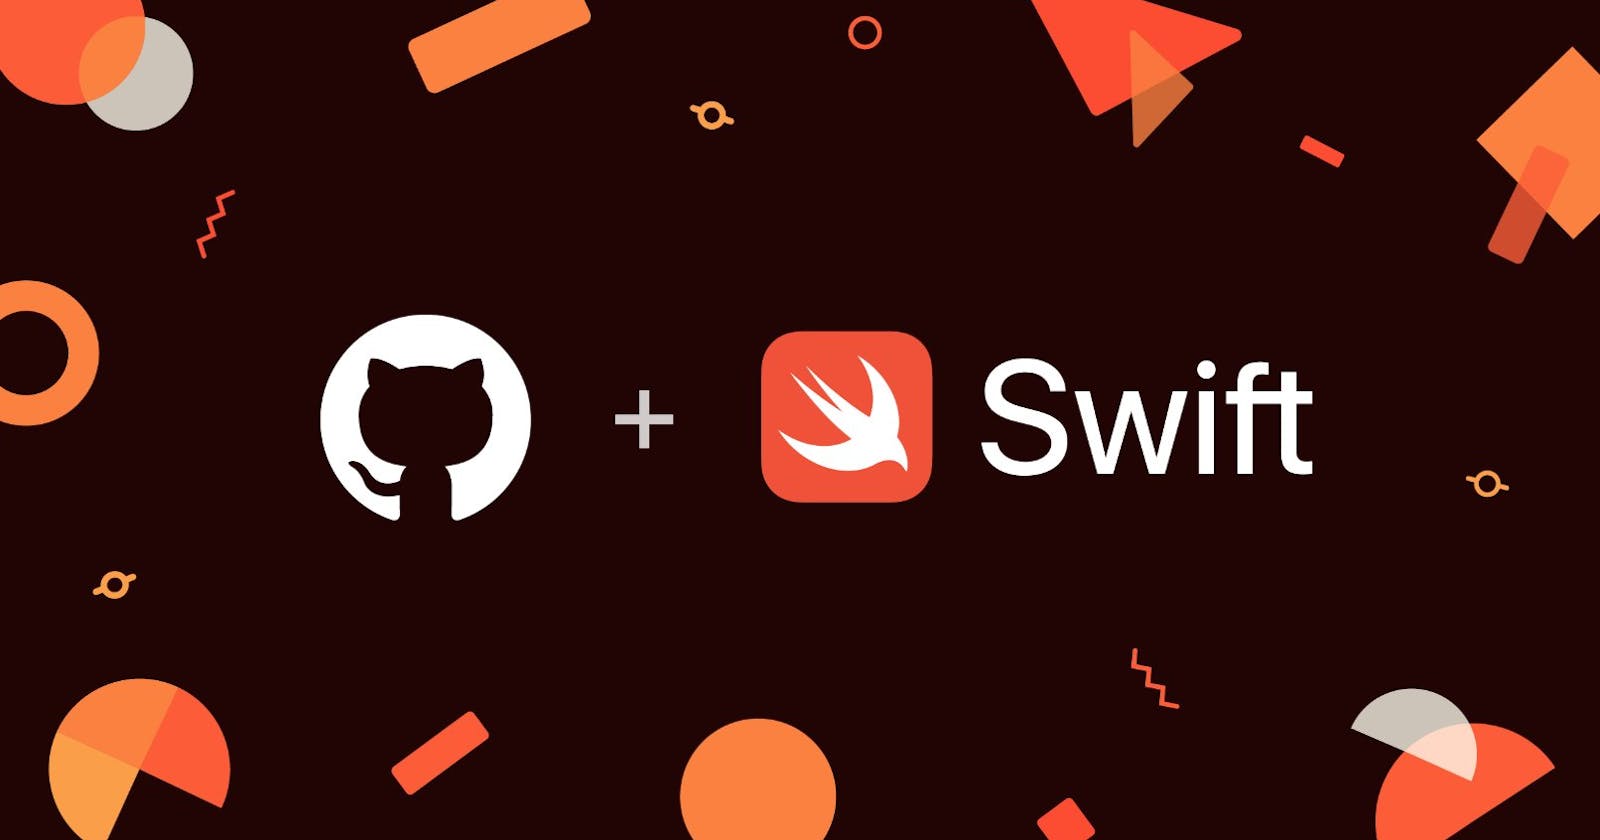 GitHub embraces Swift and provides code analysis, security alerts and dependency updates for Swift projects